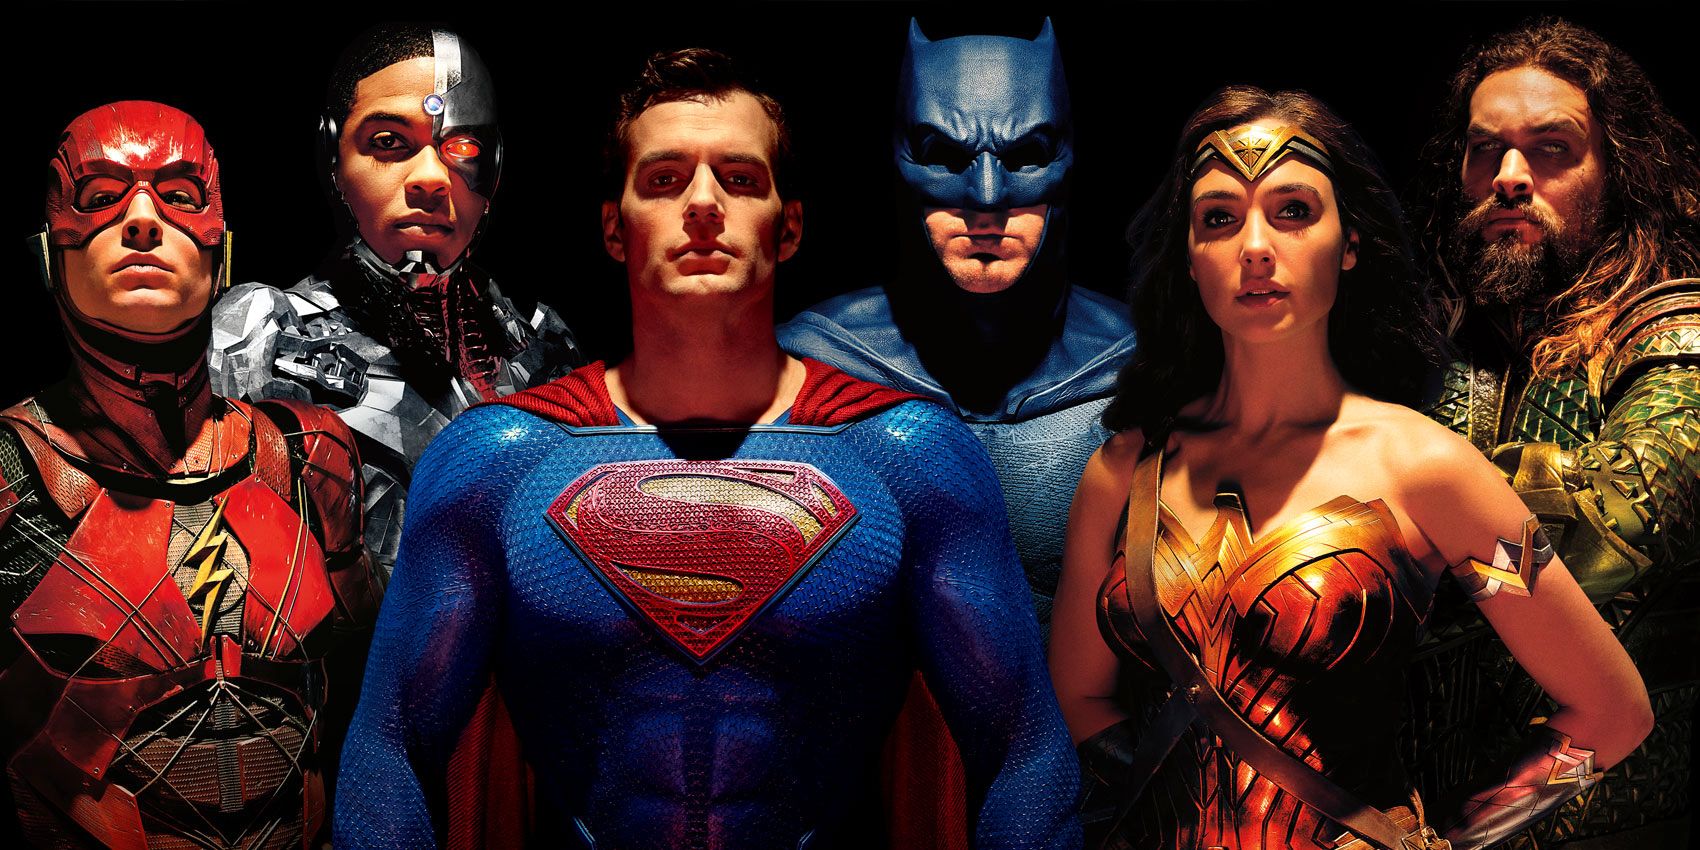 The Flash, Cyborg, Superman, Batman, Wonder Woman, and Aquaman in a promotional image for Justice League.